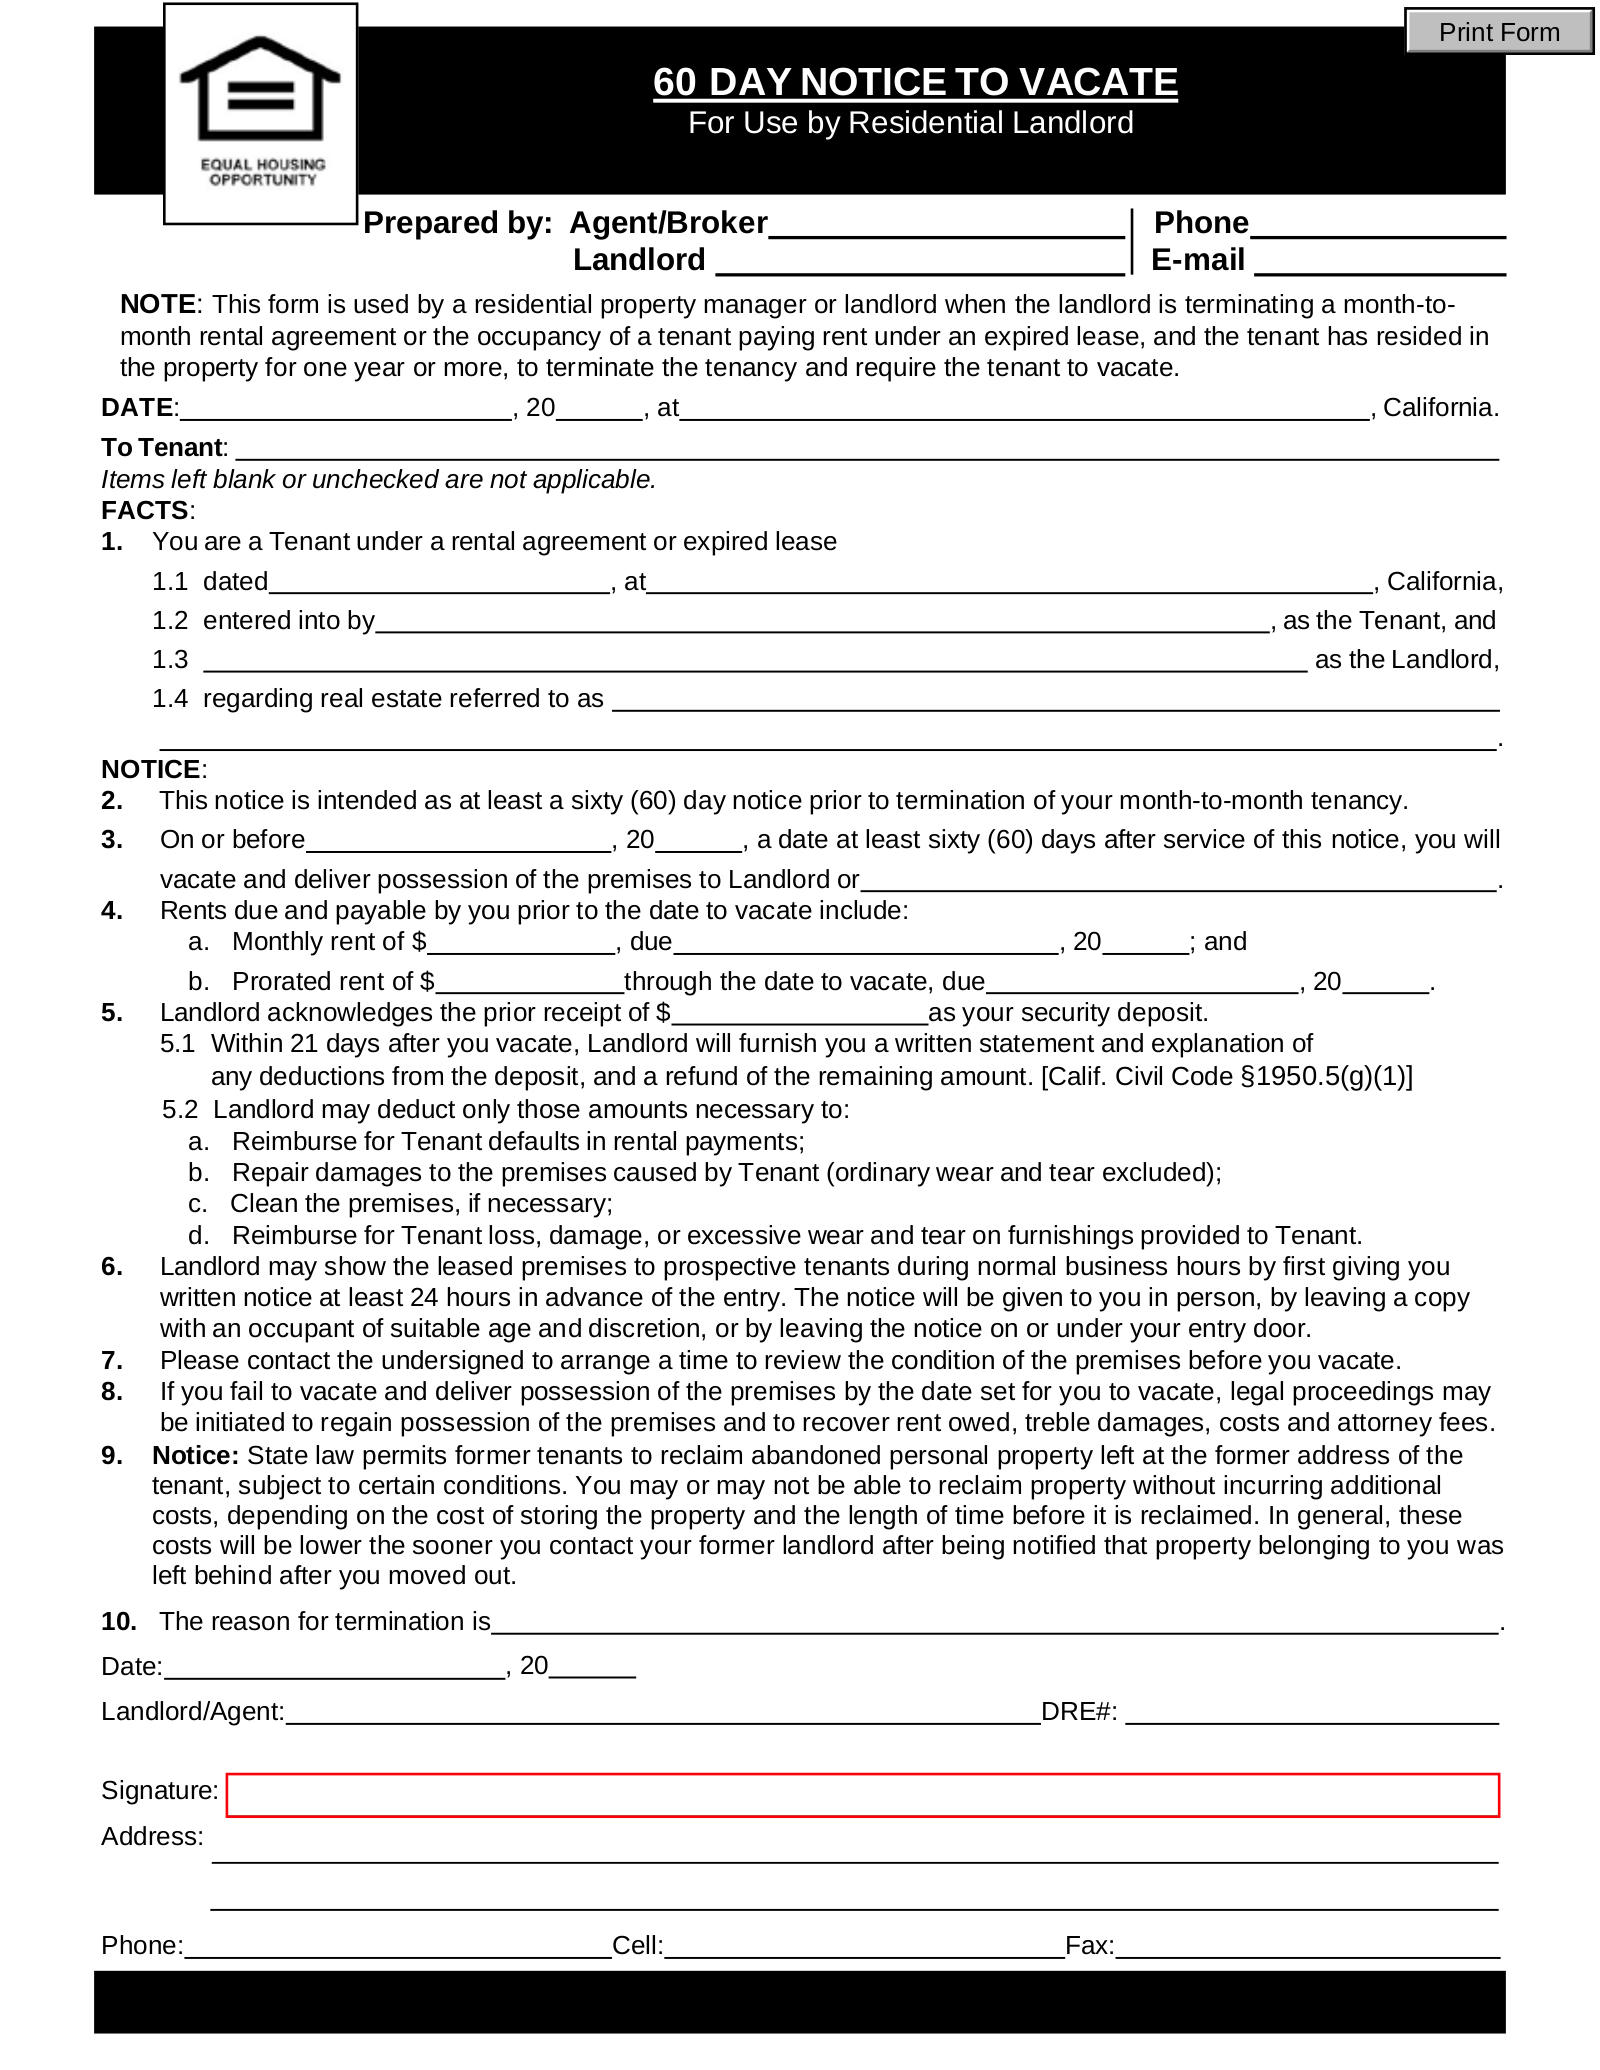 Free California Lease Termination Letter Form  7-Day Notice